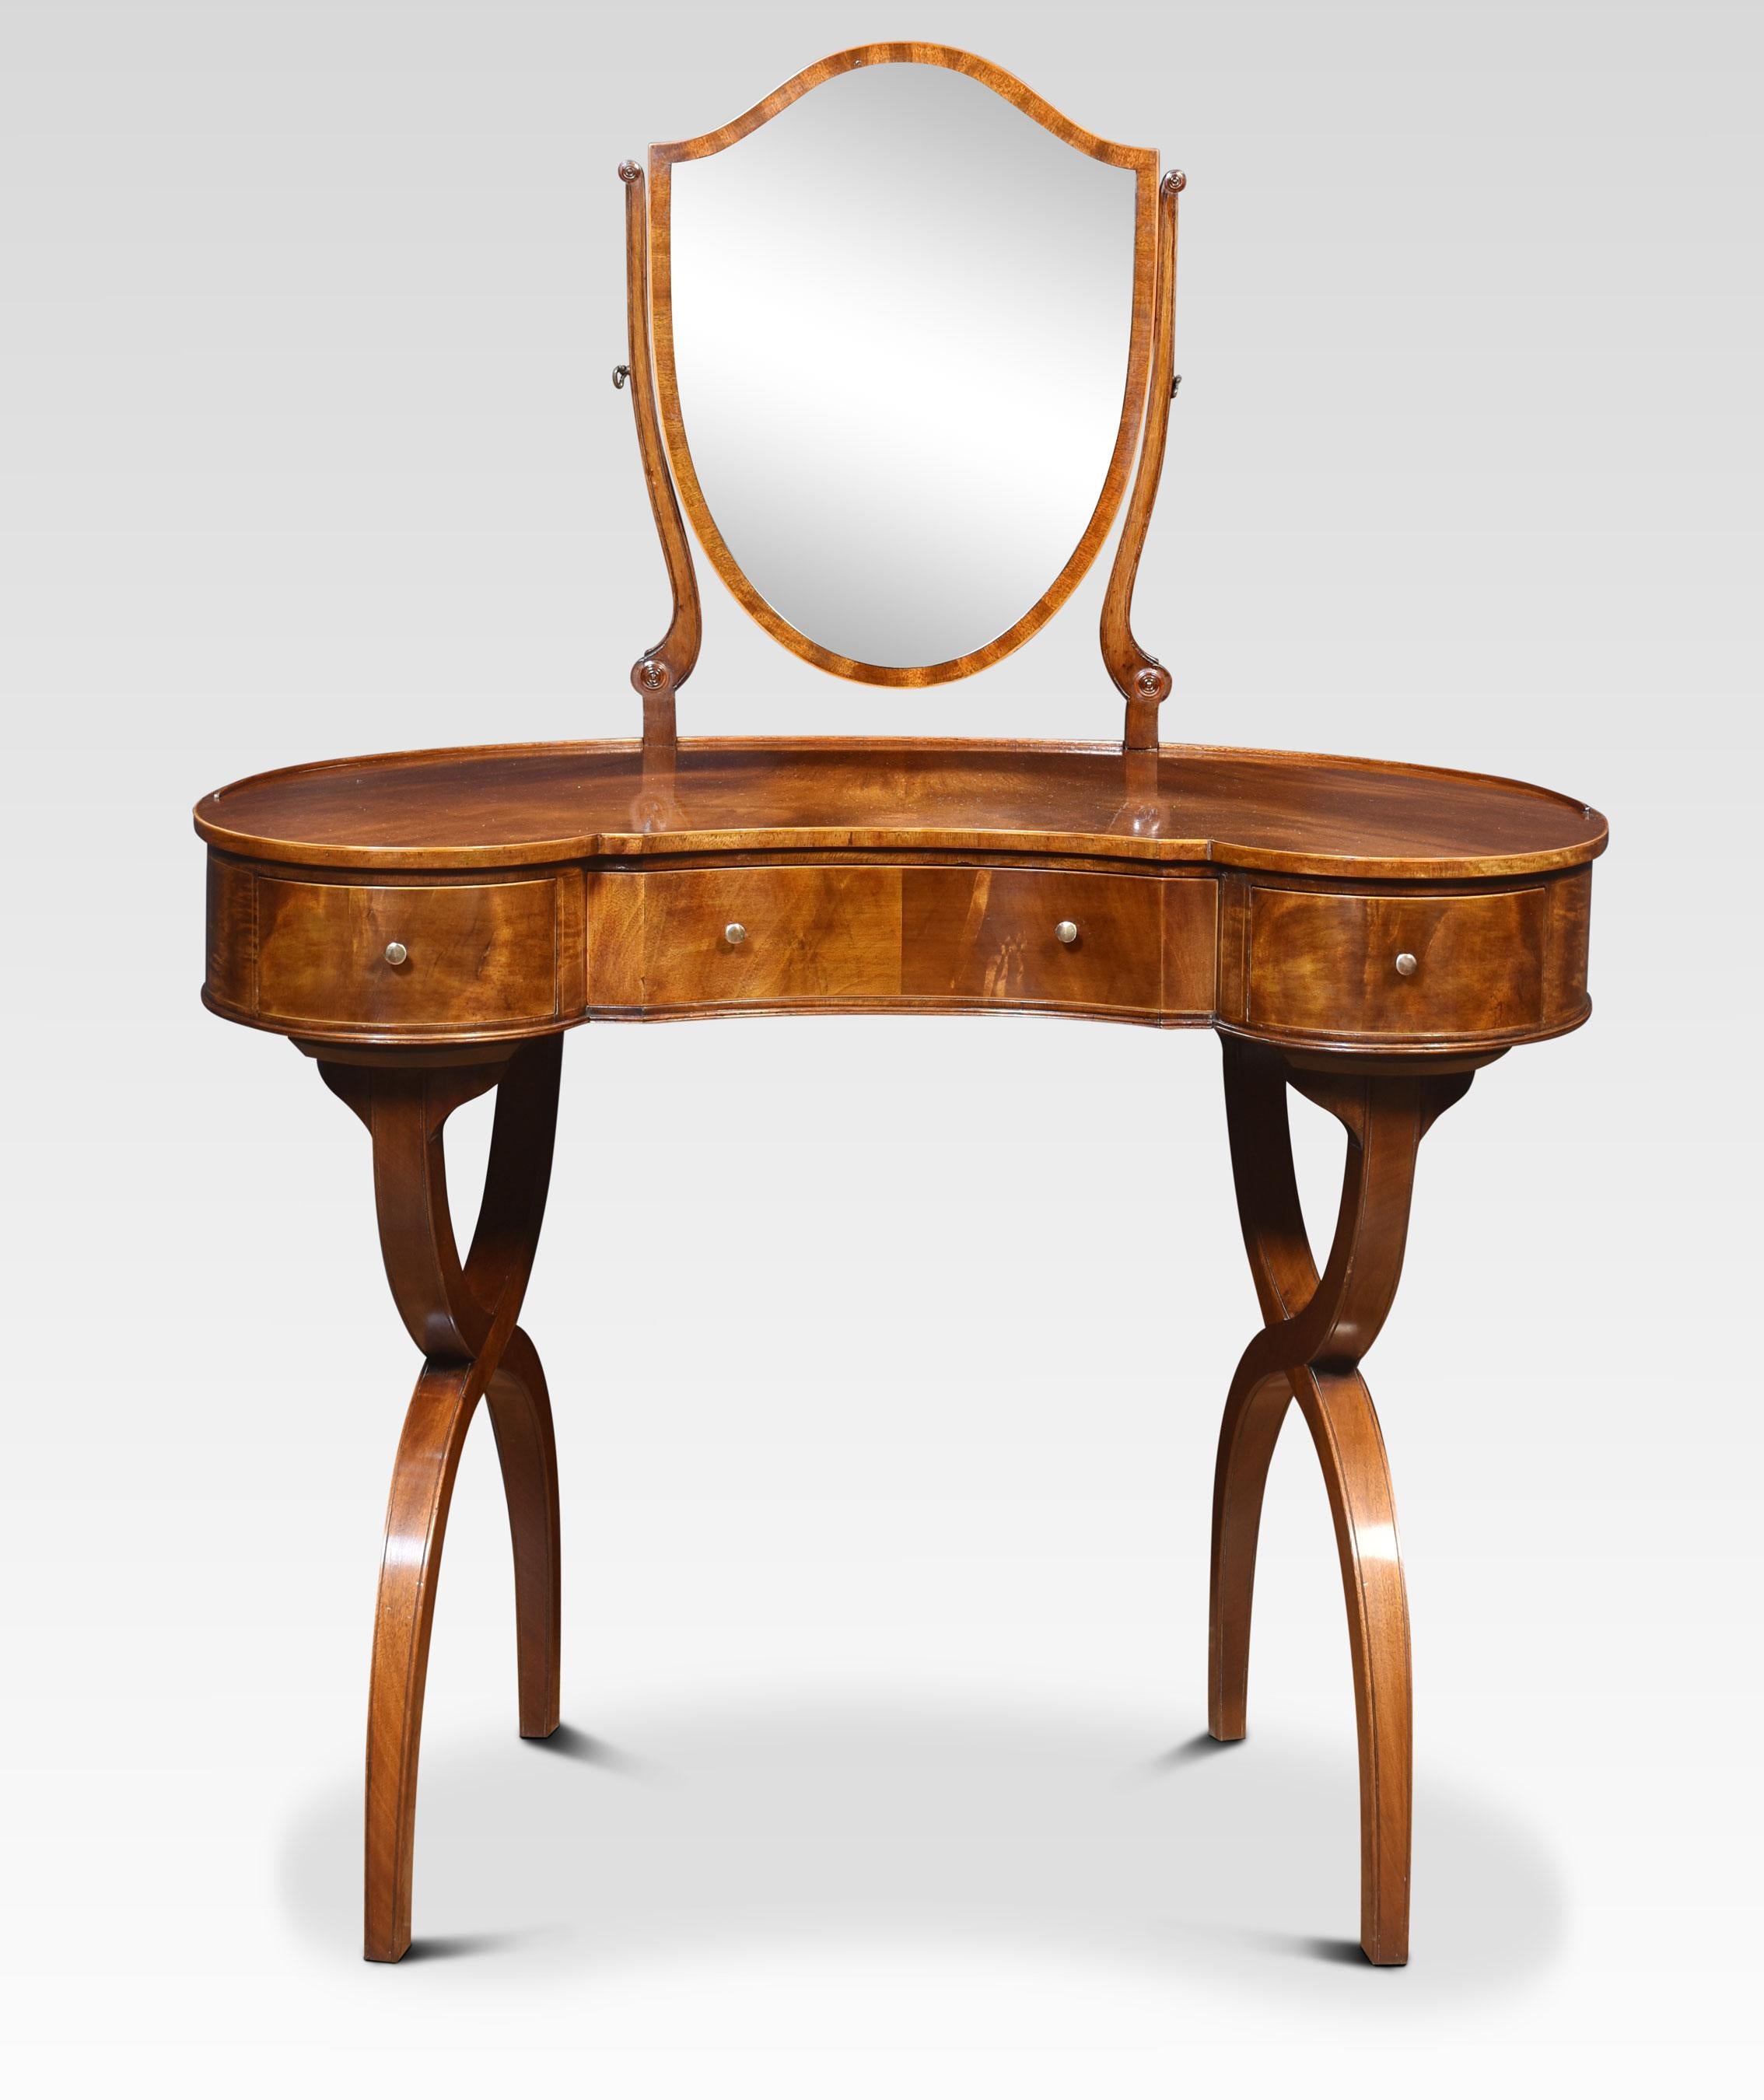 Mahogany kidney-shaped lady’s dressing table, the shield-shaped adjustable mirror supported on slender mahogany supports. To the well-figured kidney-shaped top. To the frieze fitted with three drawers with brass handles. All raised up on x-shaped